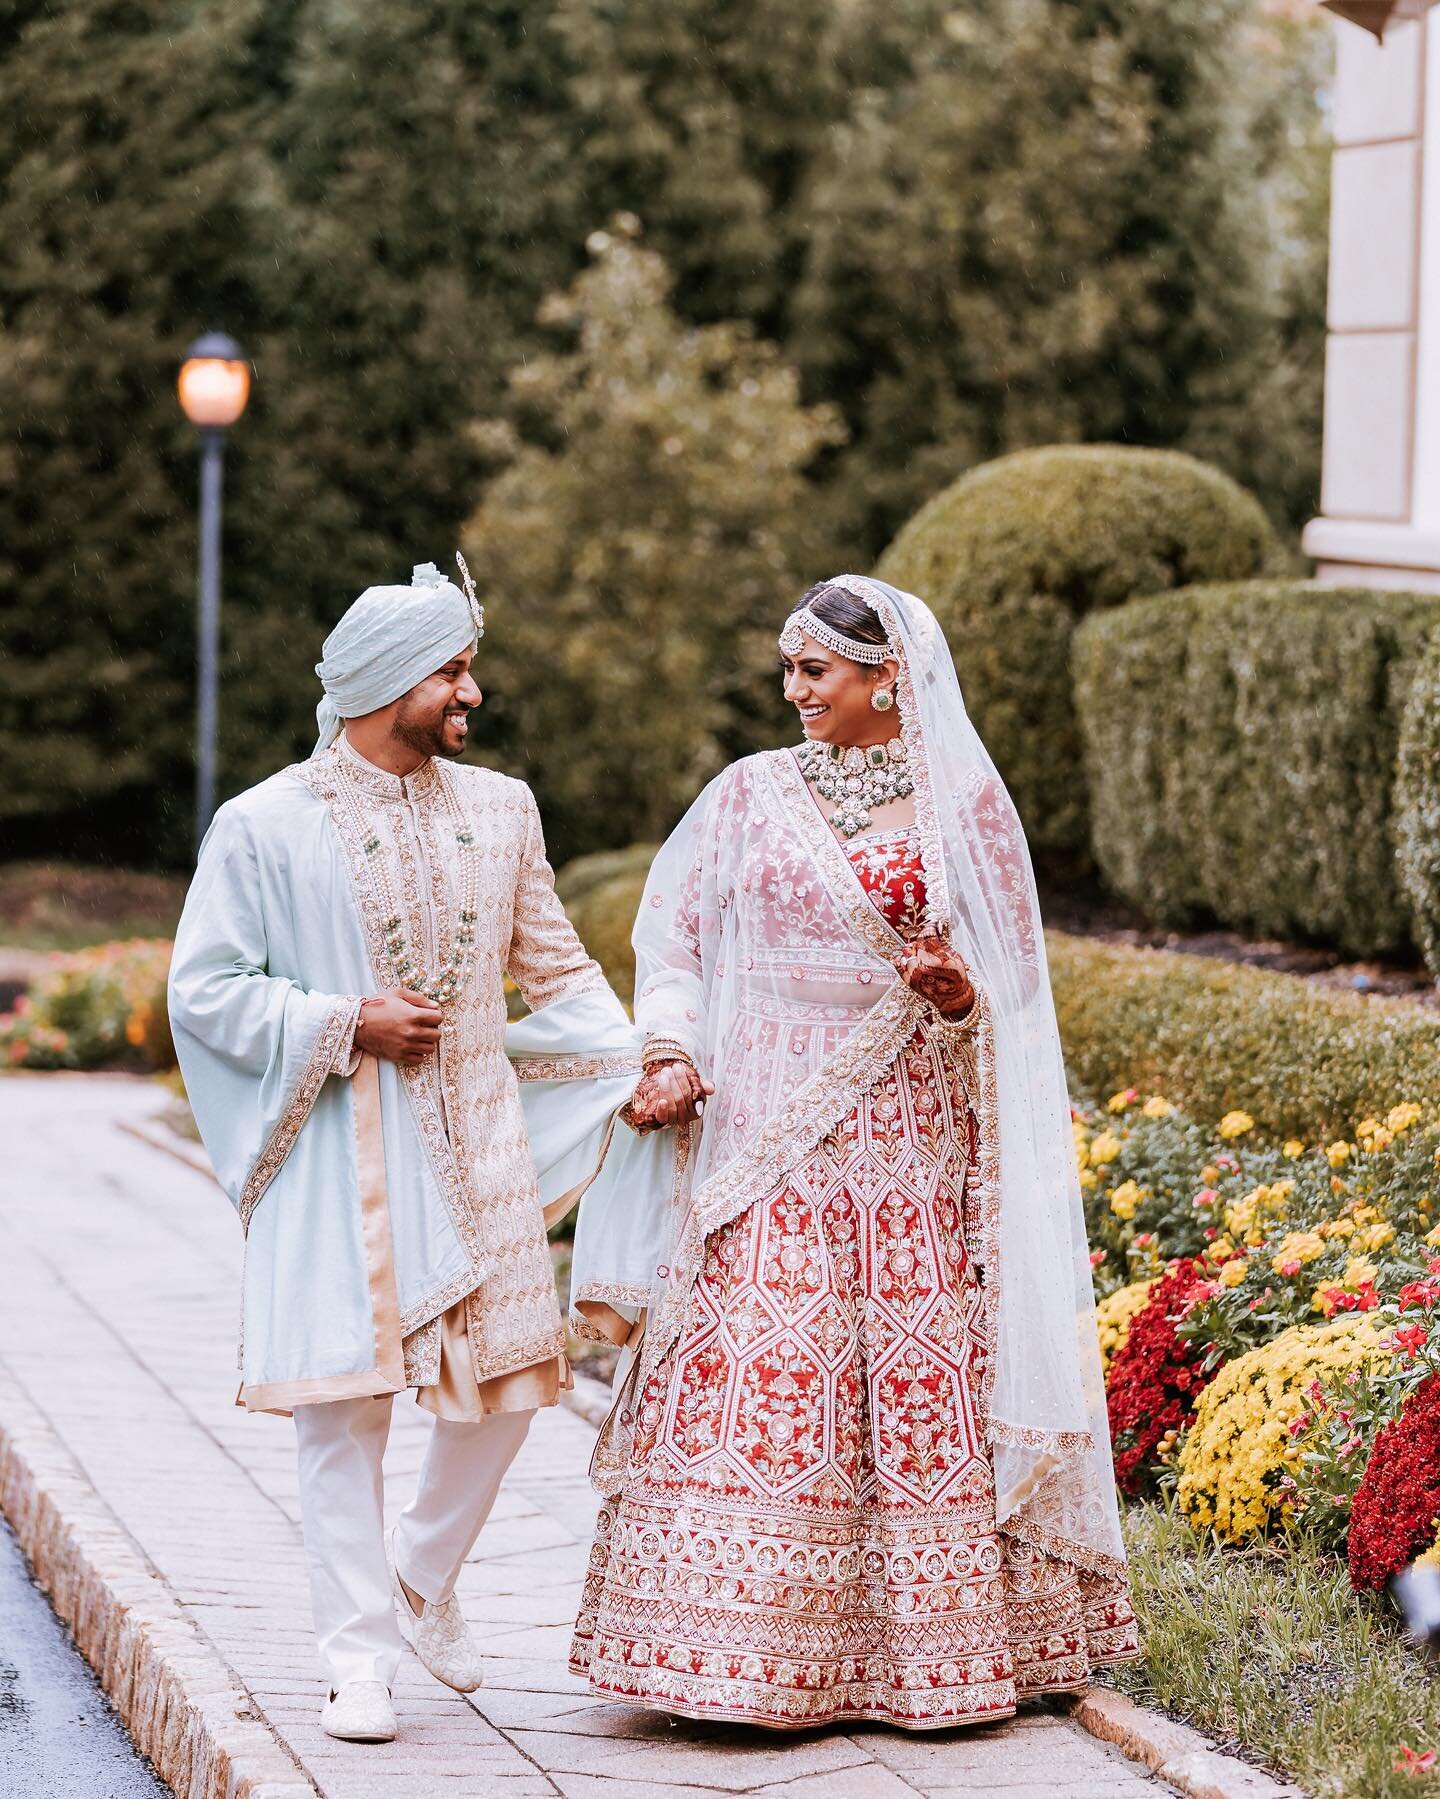 Akshay + Bindi Wedding Series | Wedding Day

The one we all have been waiting for! ❤️

.
. 
.
#TumHiHoEvents #THH #indianweddingplanner #indianwedding #indianweddings #desiwedding #desiweddings #southasianweddings #southasianwedding #indianbrides #we